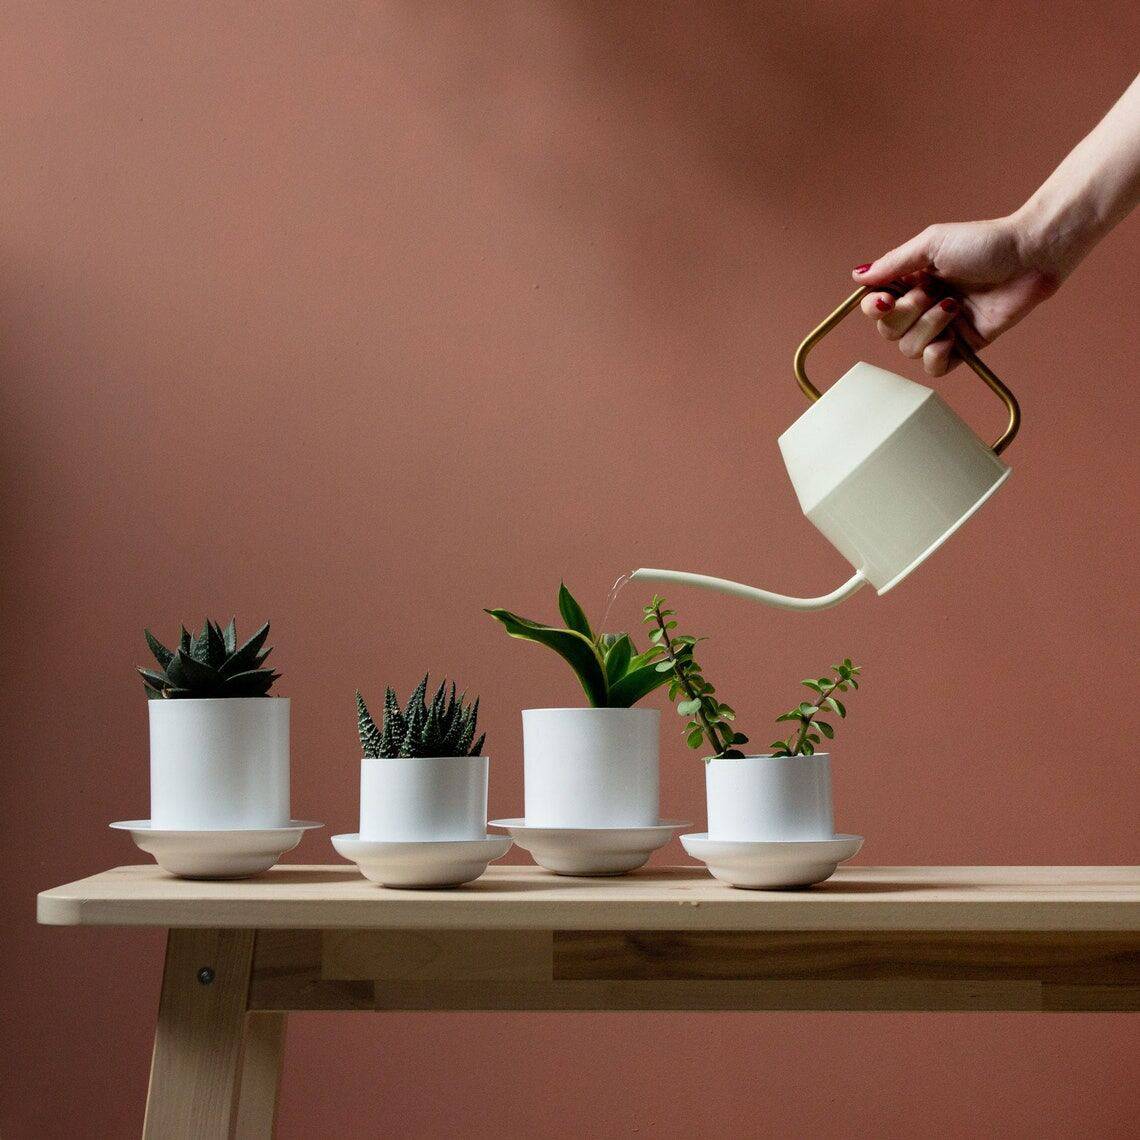 A woman's hand holds a watering can and waters four small plants in white ceramic planters